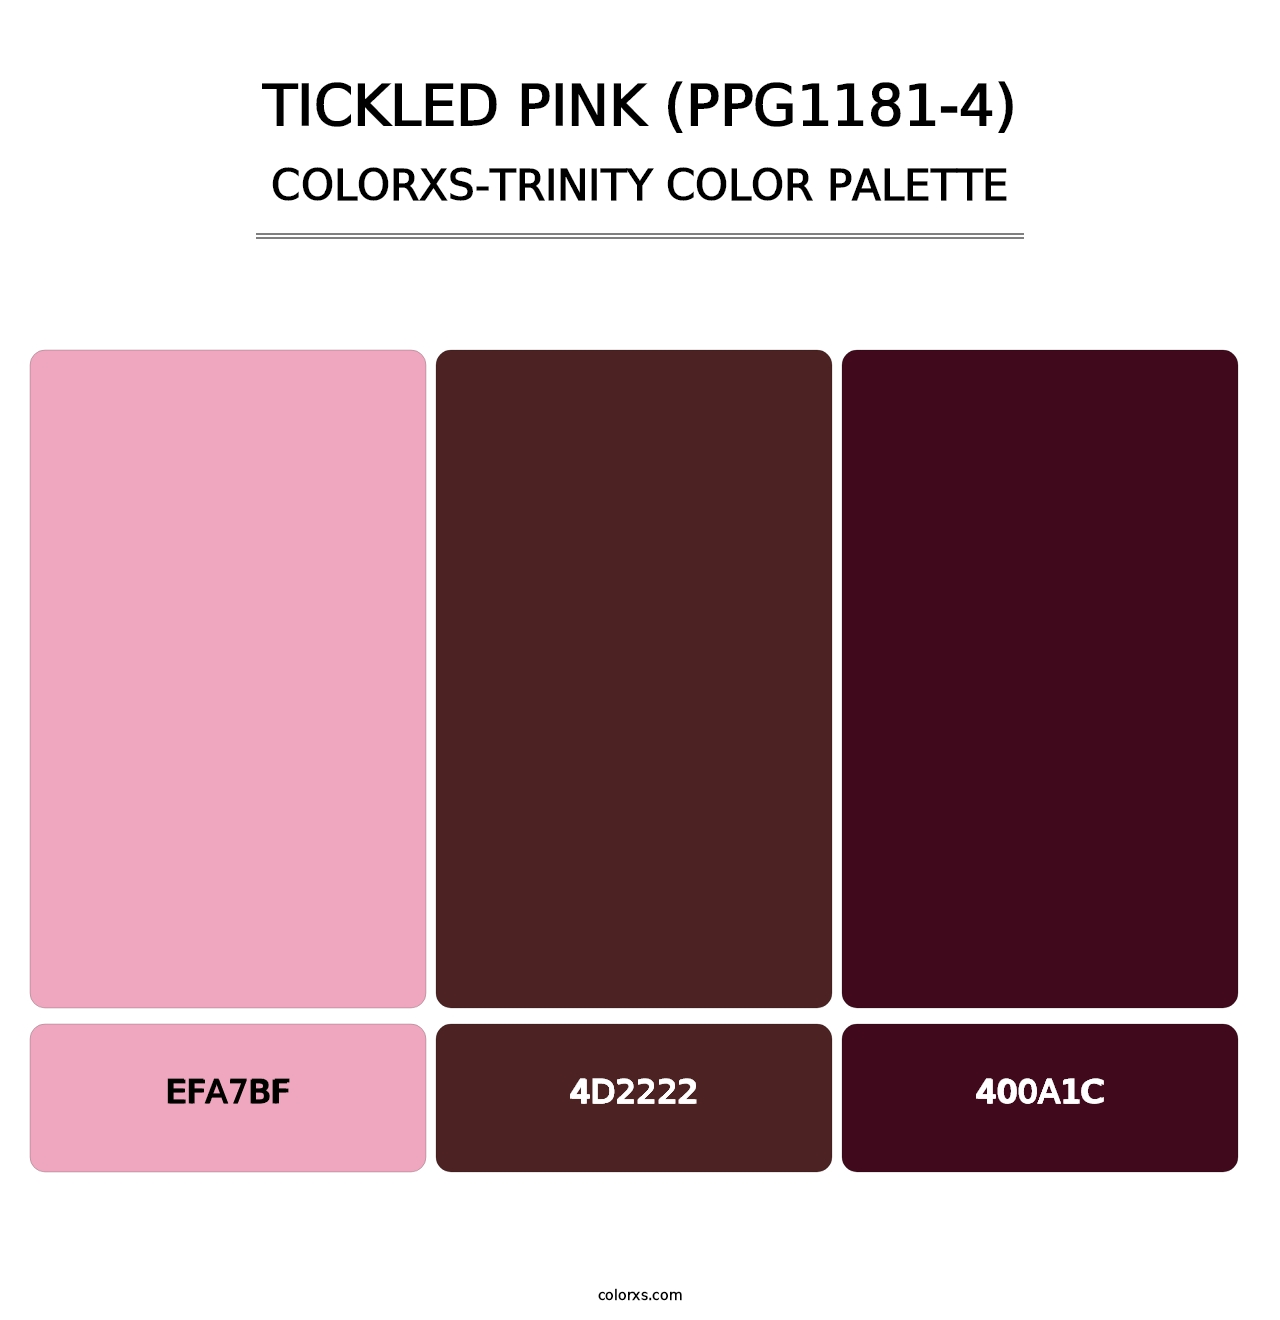 Tickled Pink (PPG1181-4) - Colorxs Trinity Palette